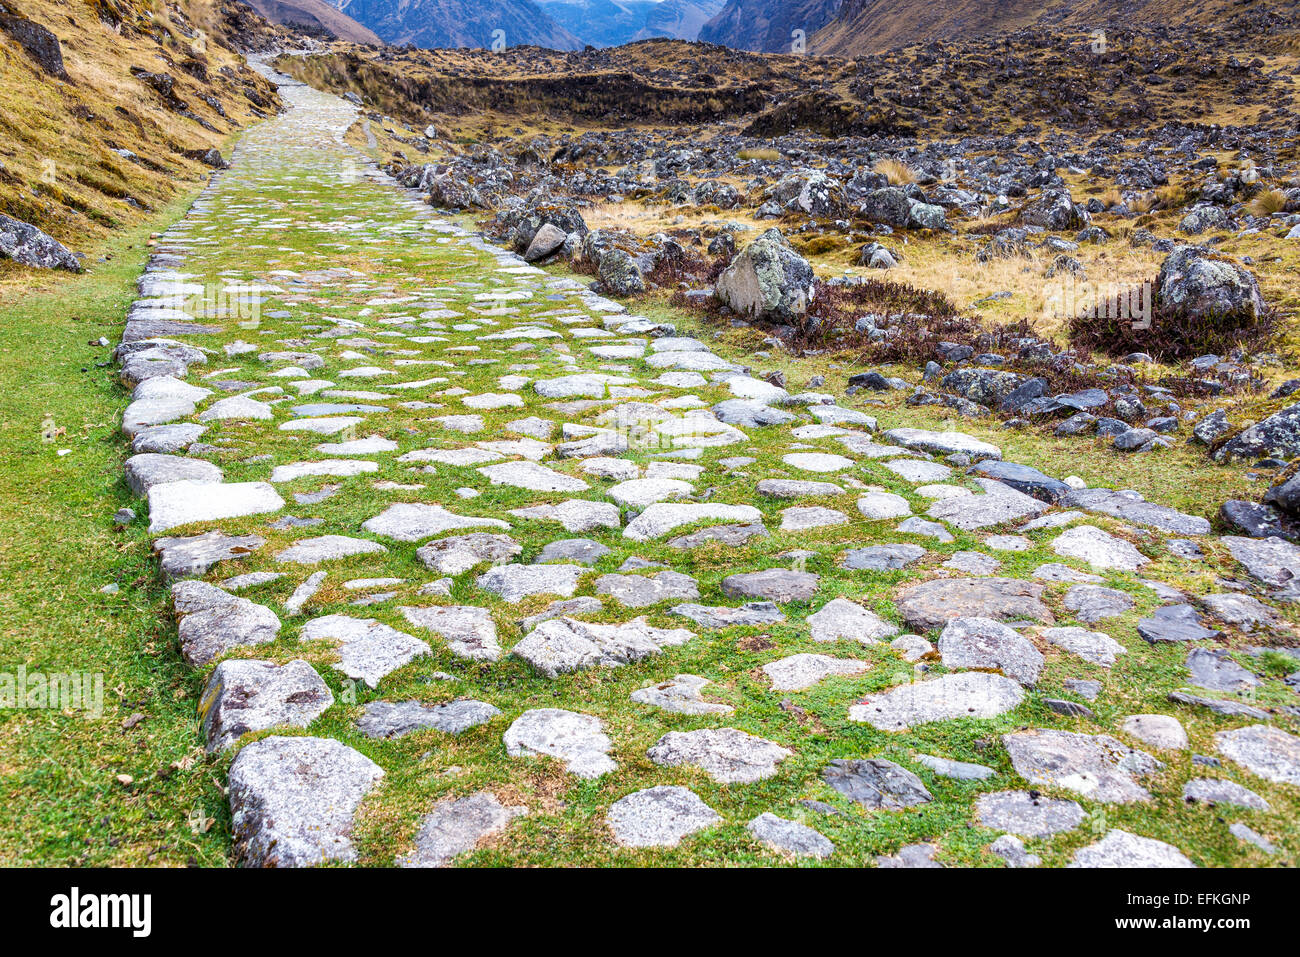 Ancient paved Incan road on the El Choro trek in the Andes mountains near La Paz, Bolivia Stock Photo